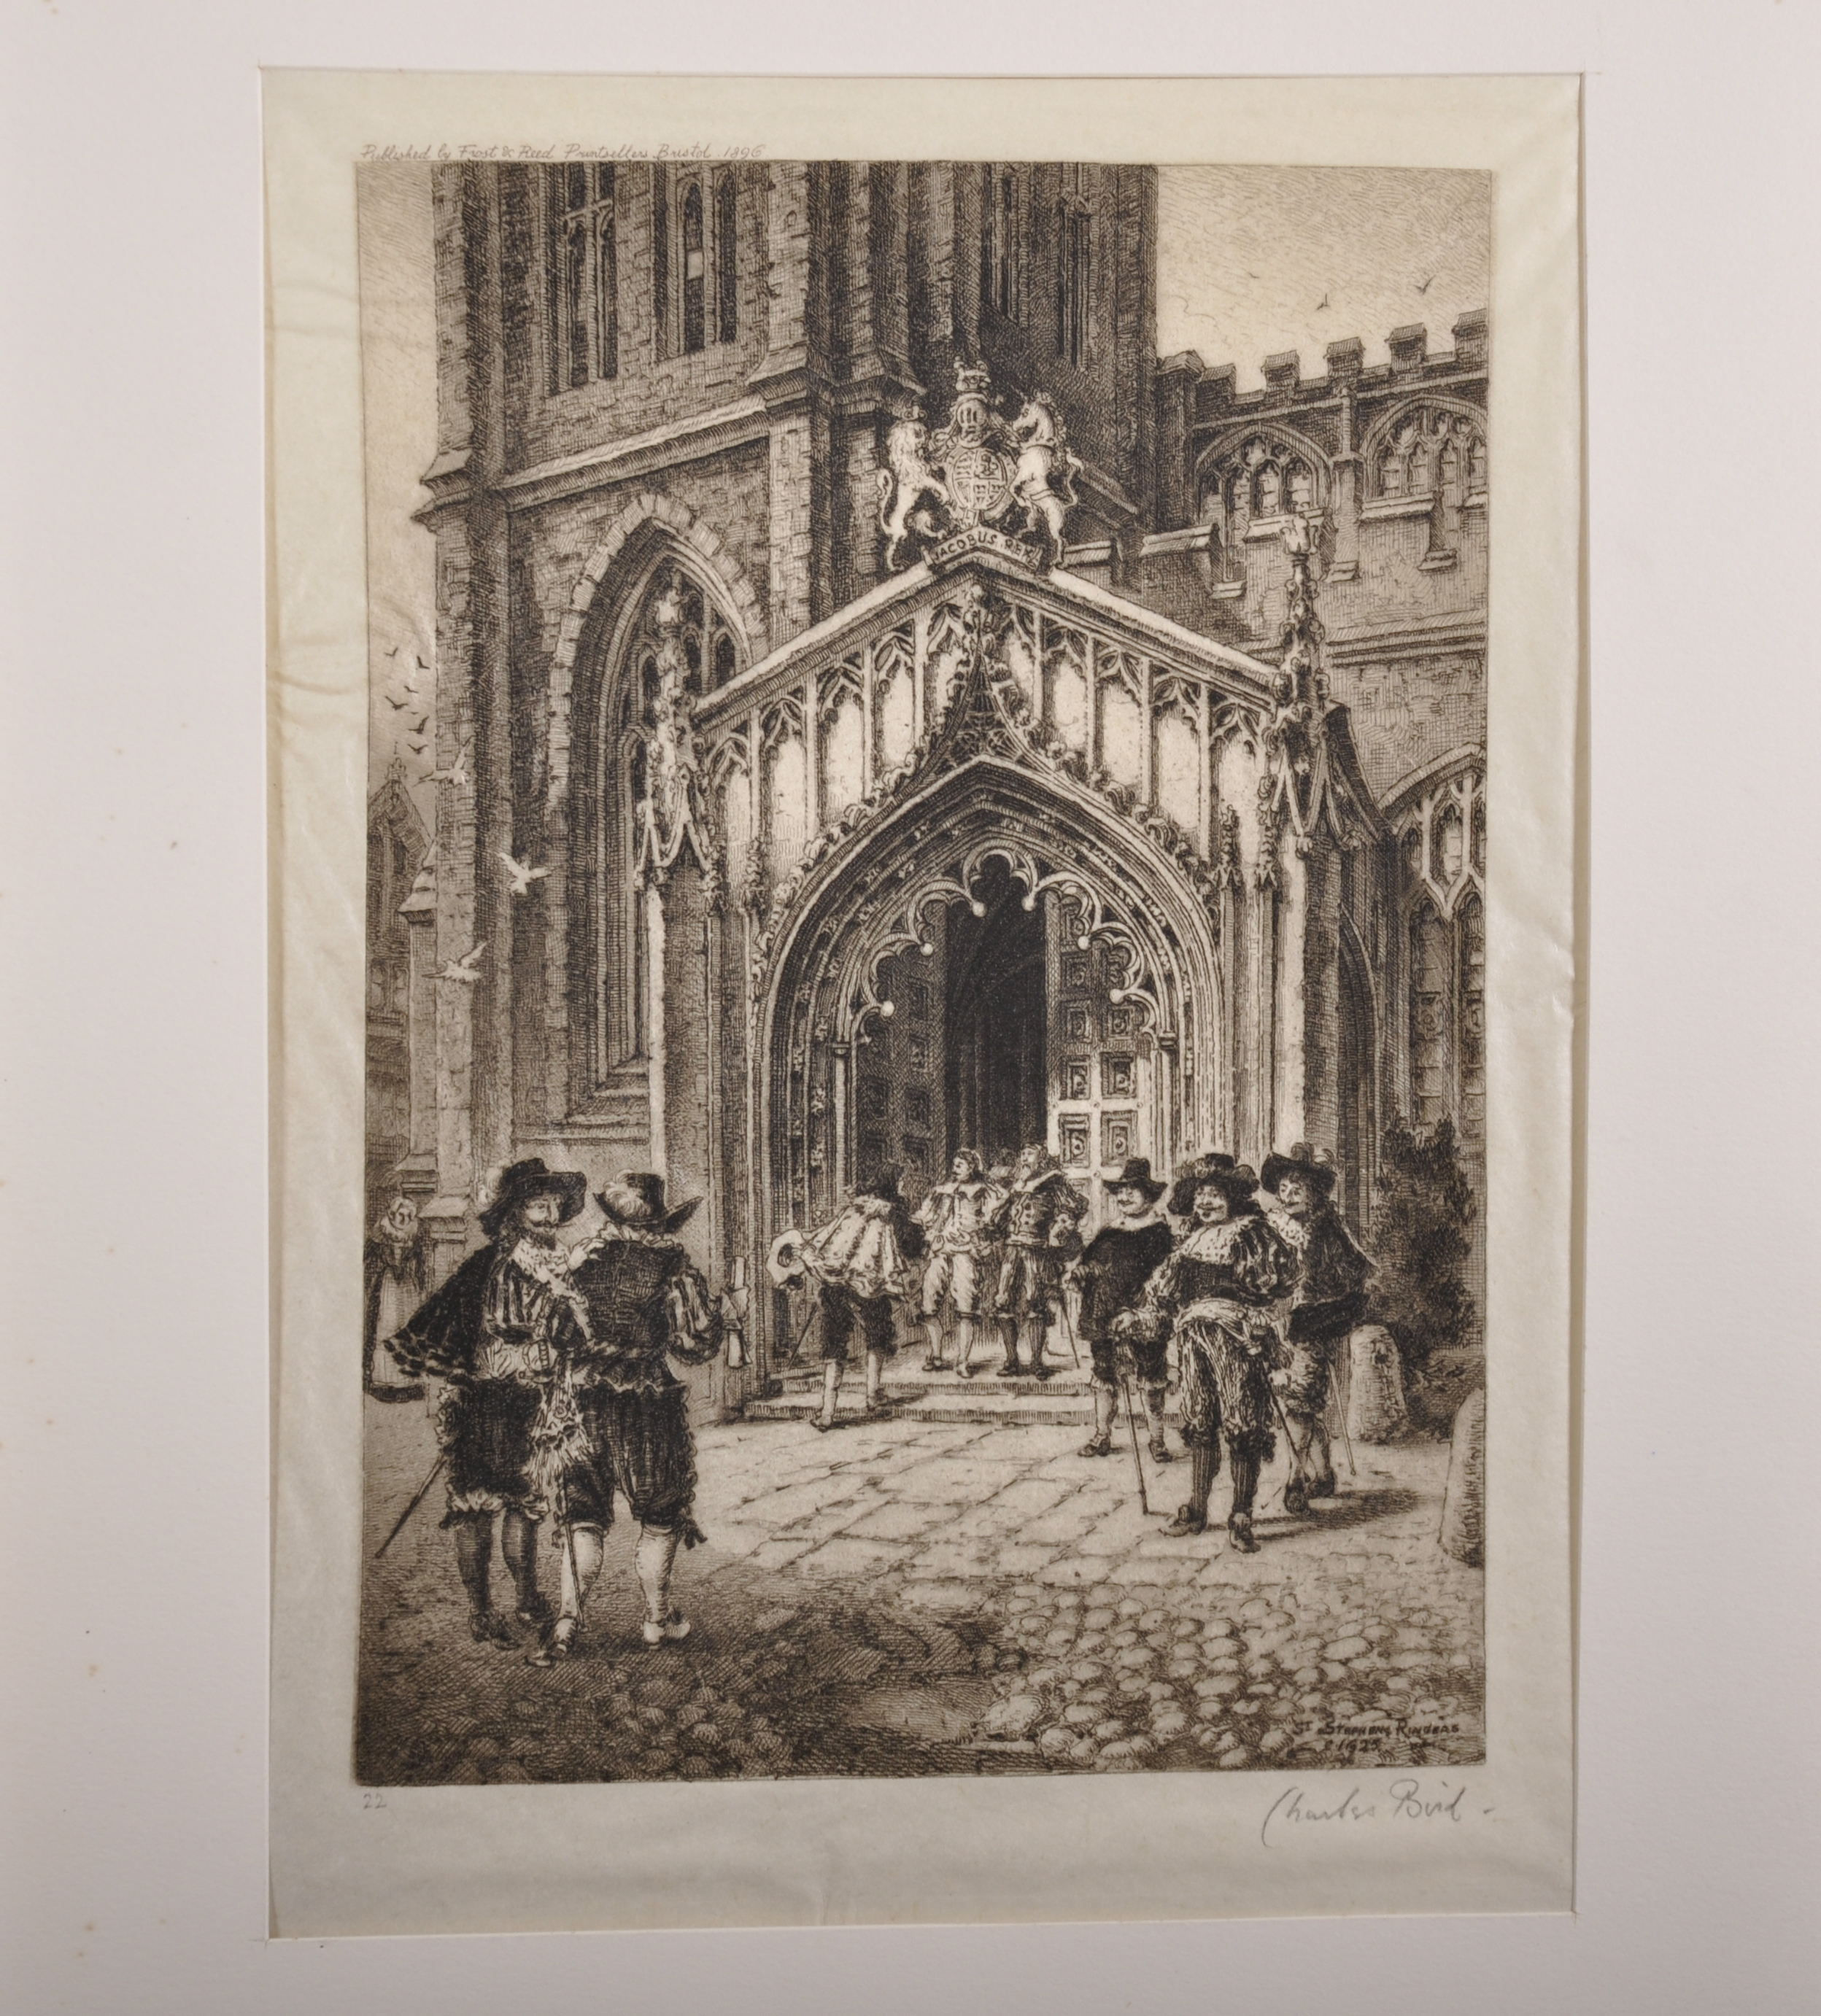 Charles Bird (act.1892-1907) British. "Historical Bristol", Etching, Signed in Pencil, 9.25" x 6. - Image 5 of 7